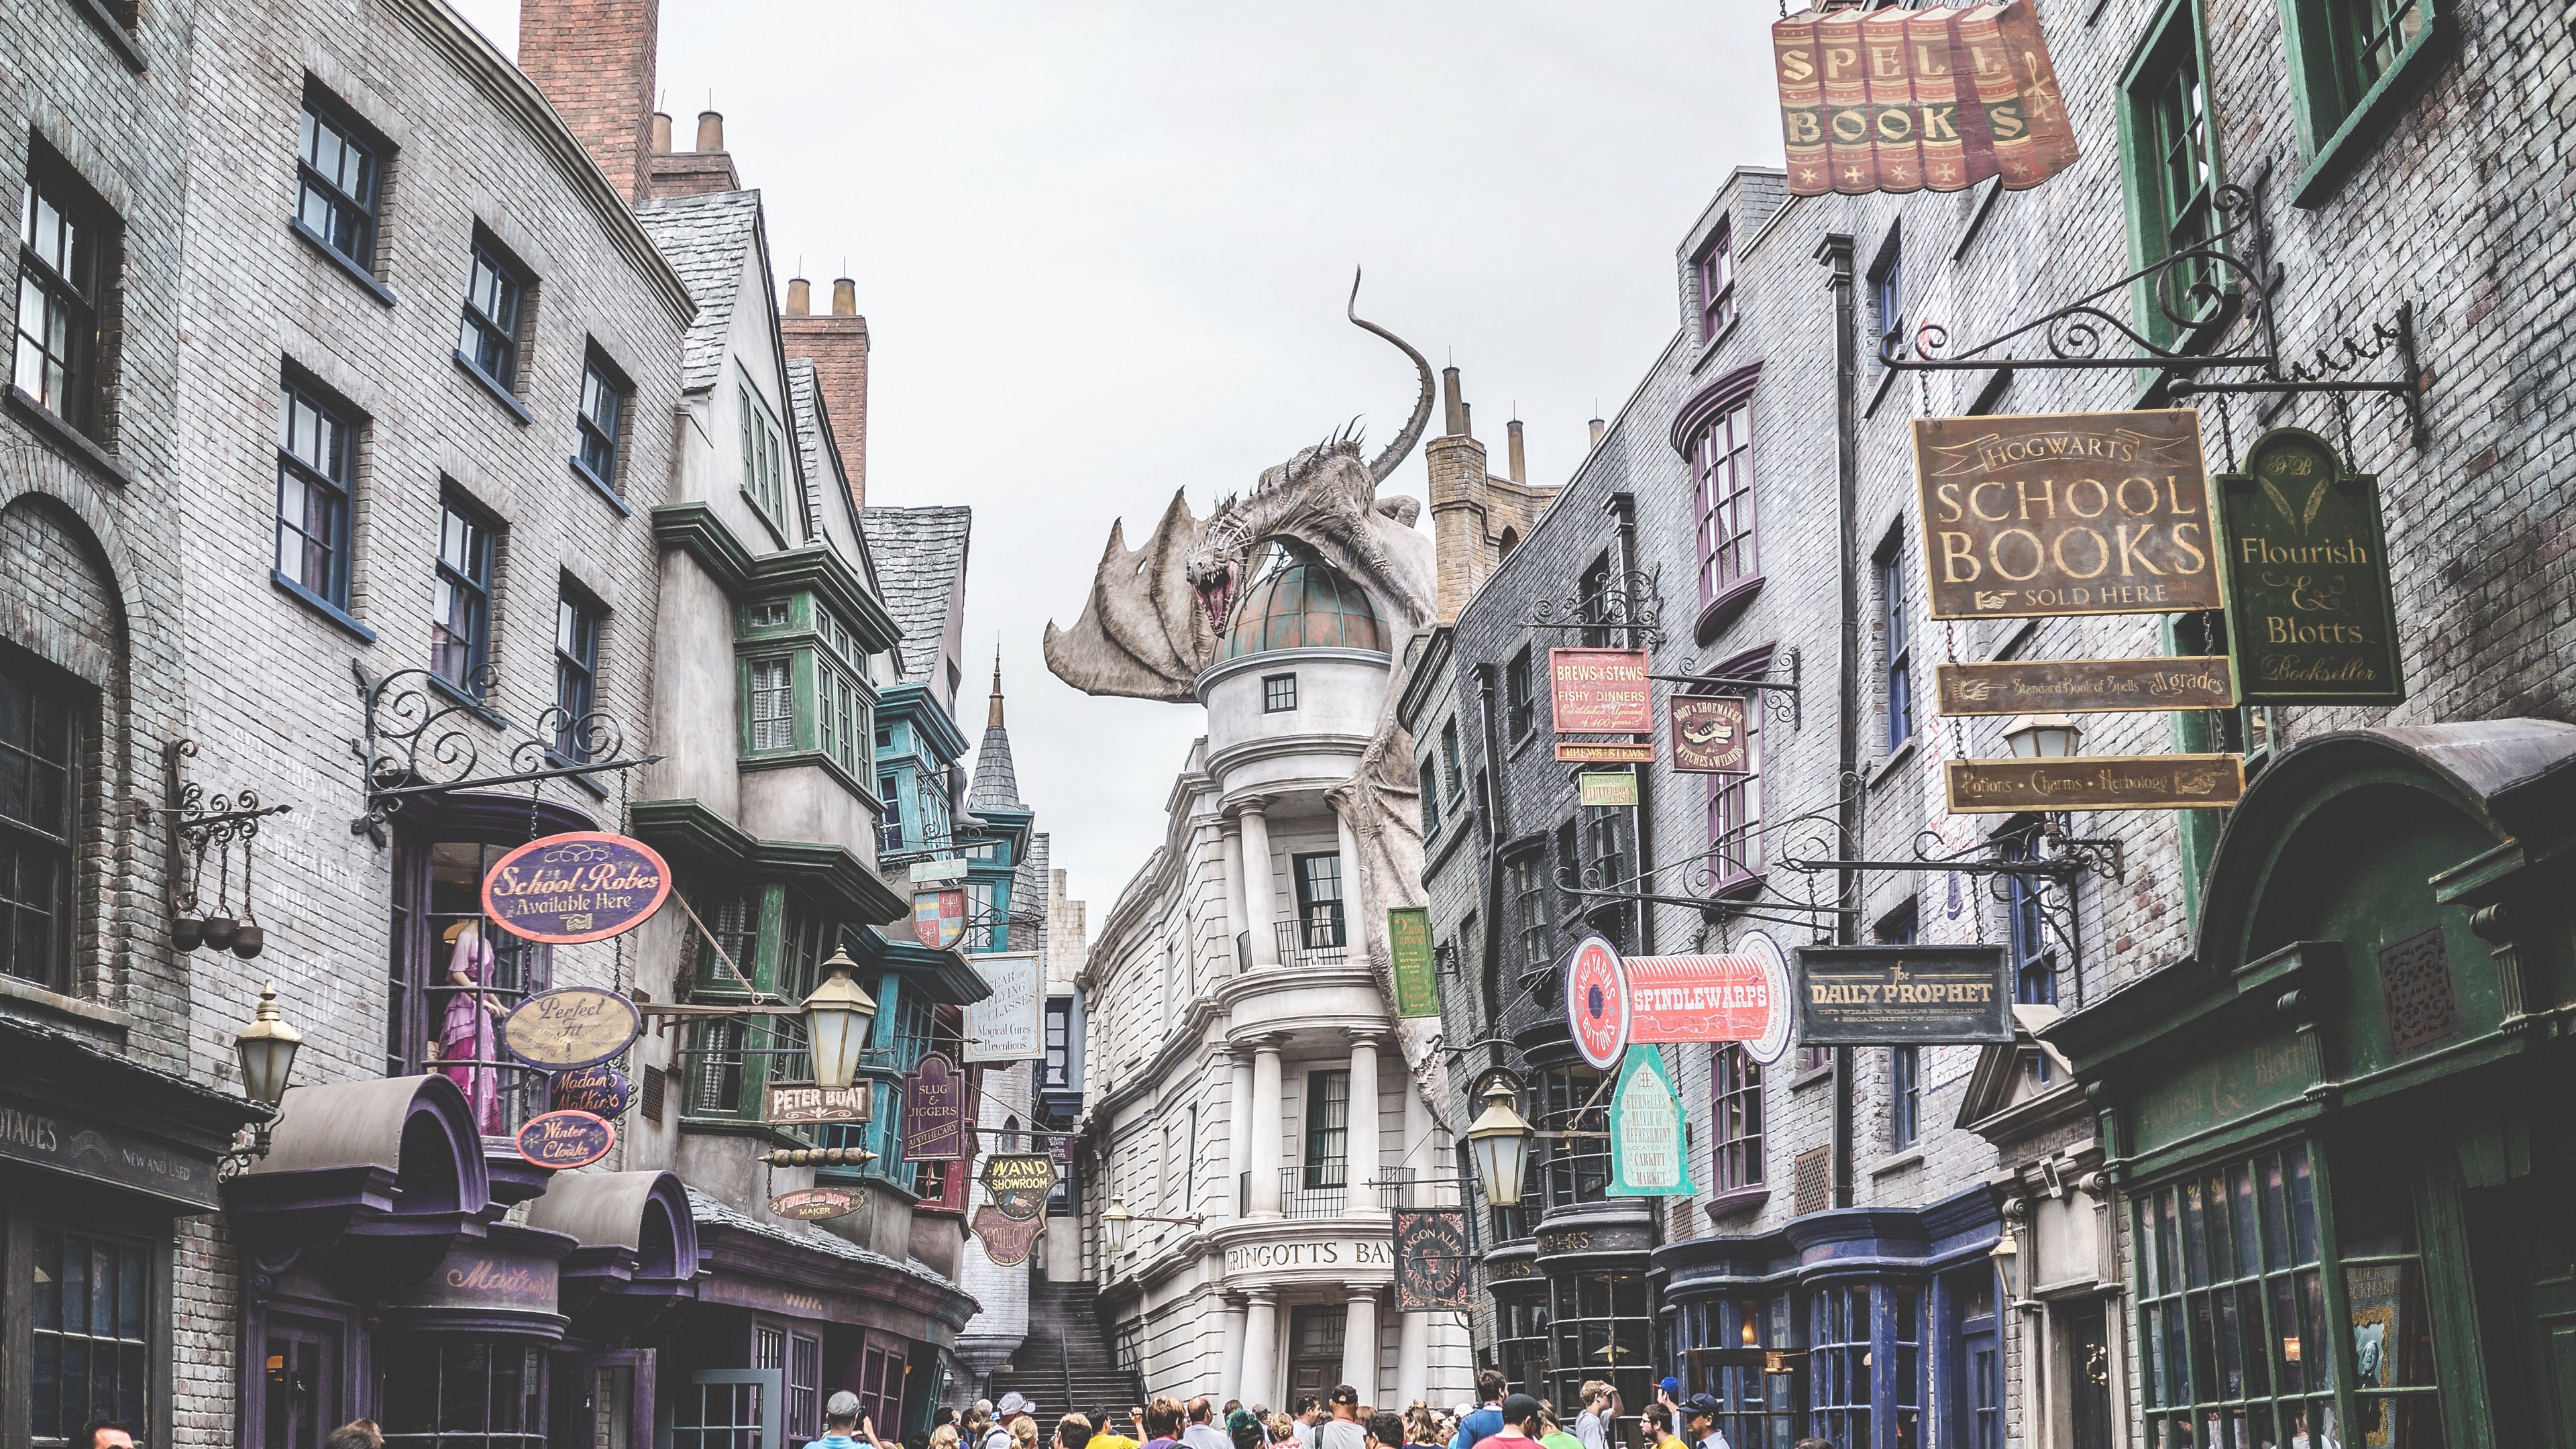 Wallpaper / harry potter building tourist and street HD 4k wallpaper free download